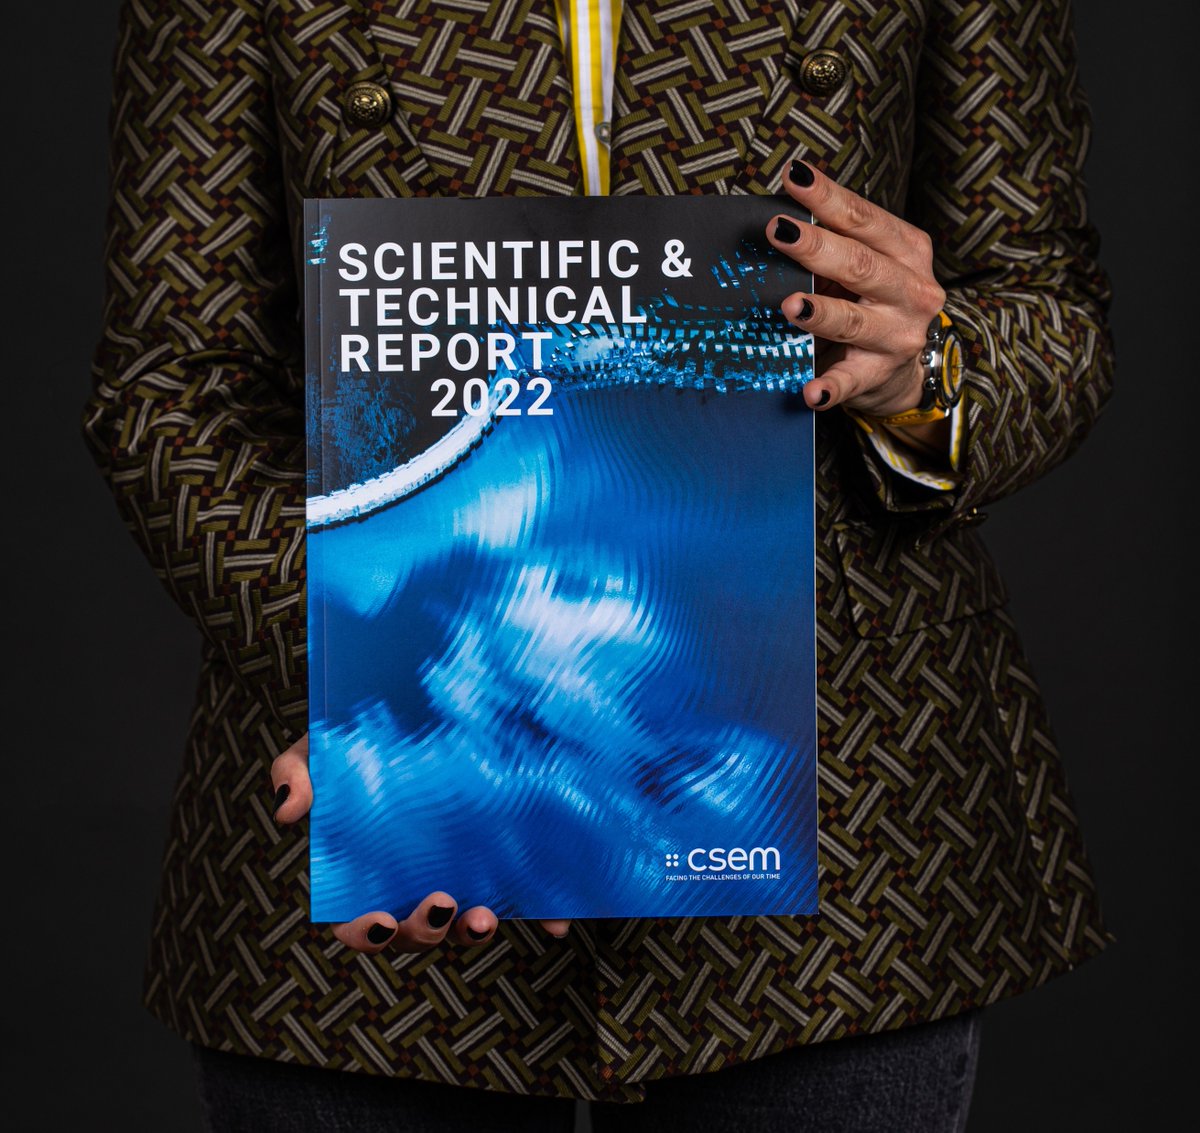 💥📰 Hot off the press, @CSEMInfo’s “Scientific & Technical Report 2022” is here! Discover the cutting-edge work we’ve been up to in #sustainableenergy, #precisionmanufacturing, #digitaltechnologies, and more ➡️ You can check out the FULL REPORT here: lnkd.in/edKedm3B